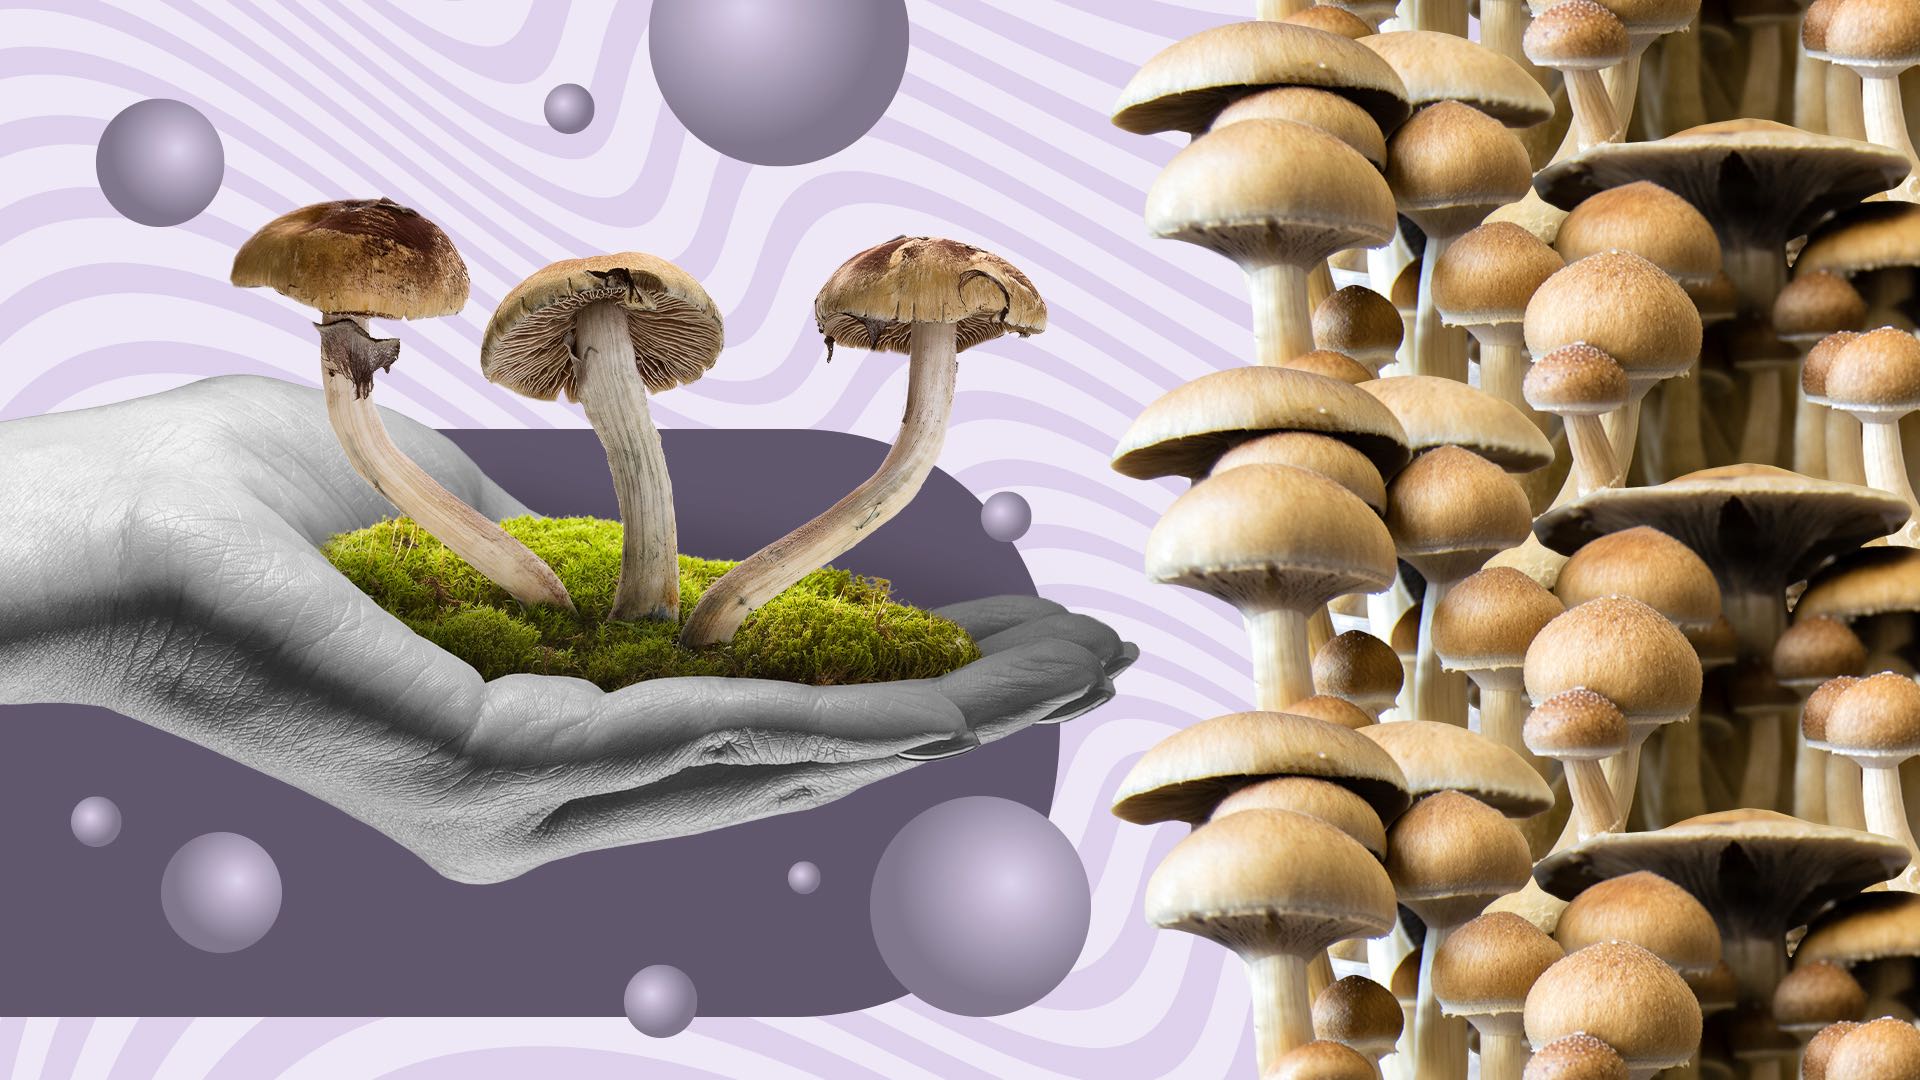 https://leafly-cms-production.imgix.net/wp-content/uploads/2022/09/08142705/how-to-grow-mushrooms.jpg